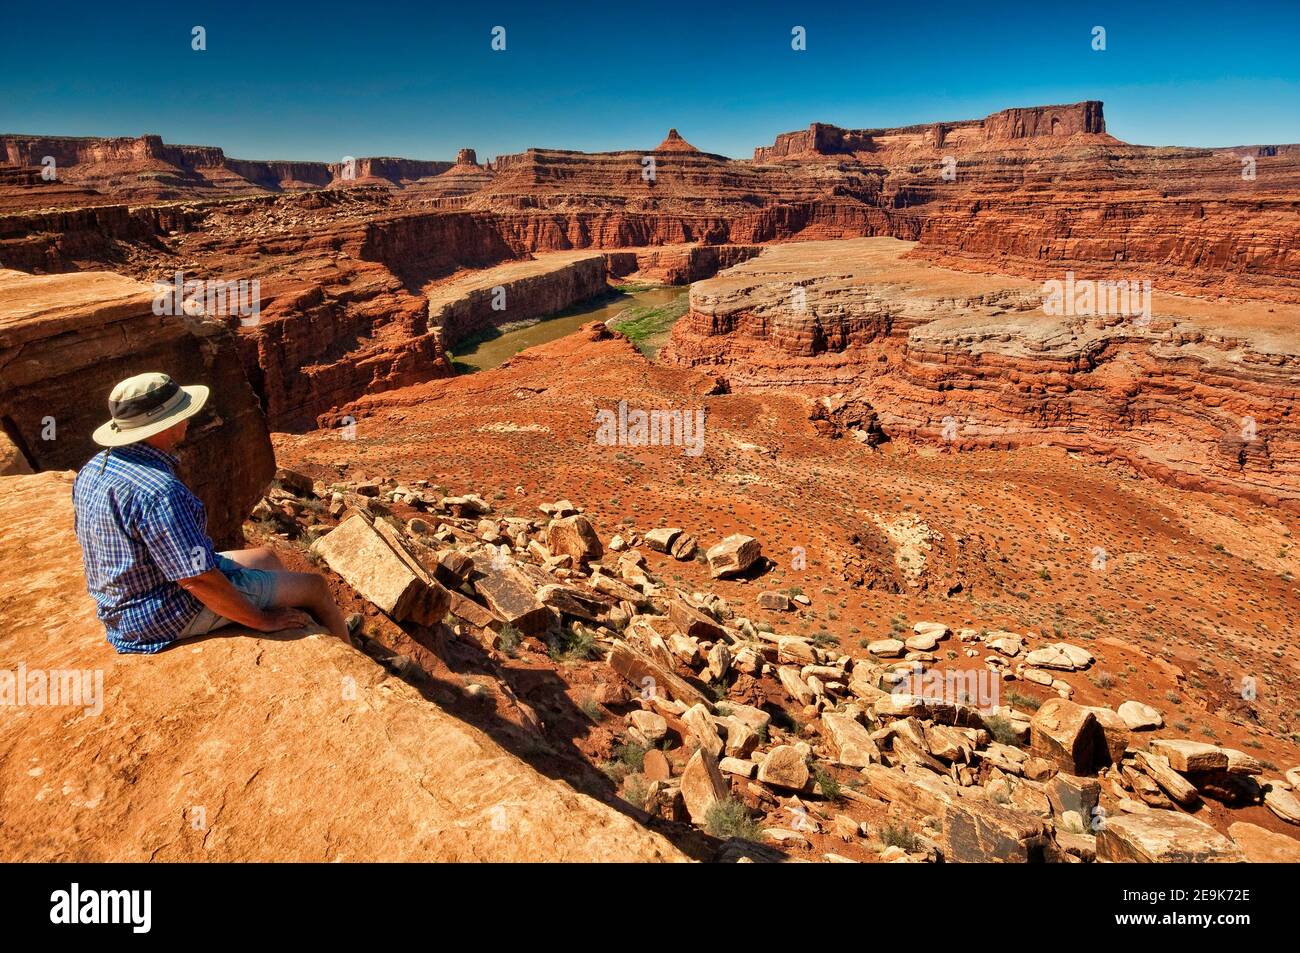 Man sitting at Colorado River Overlook in Walking Rocks area, Dead Horse Point cliffs in distance, White Rim Road, Canyonlands National Park, Utah USA Stock Photo